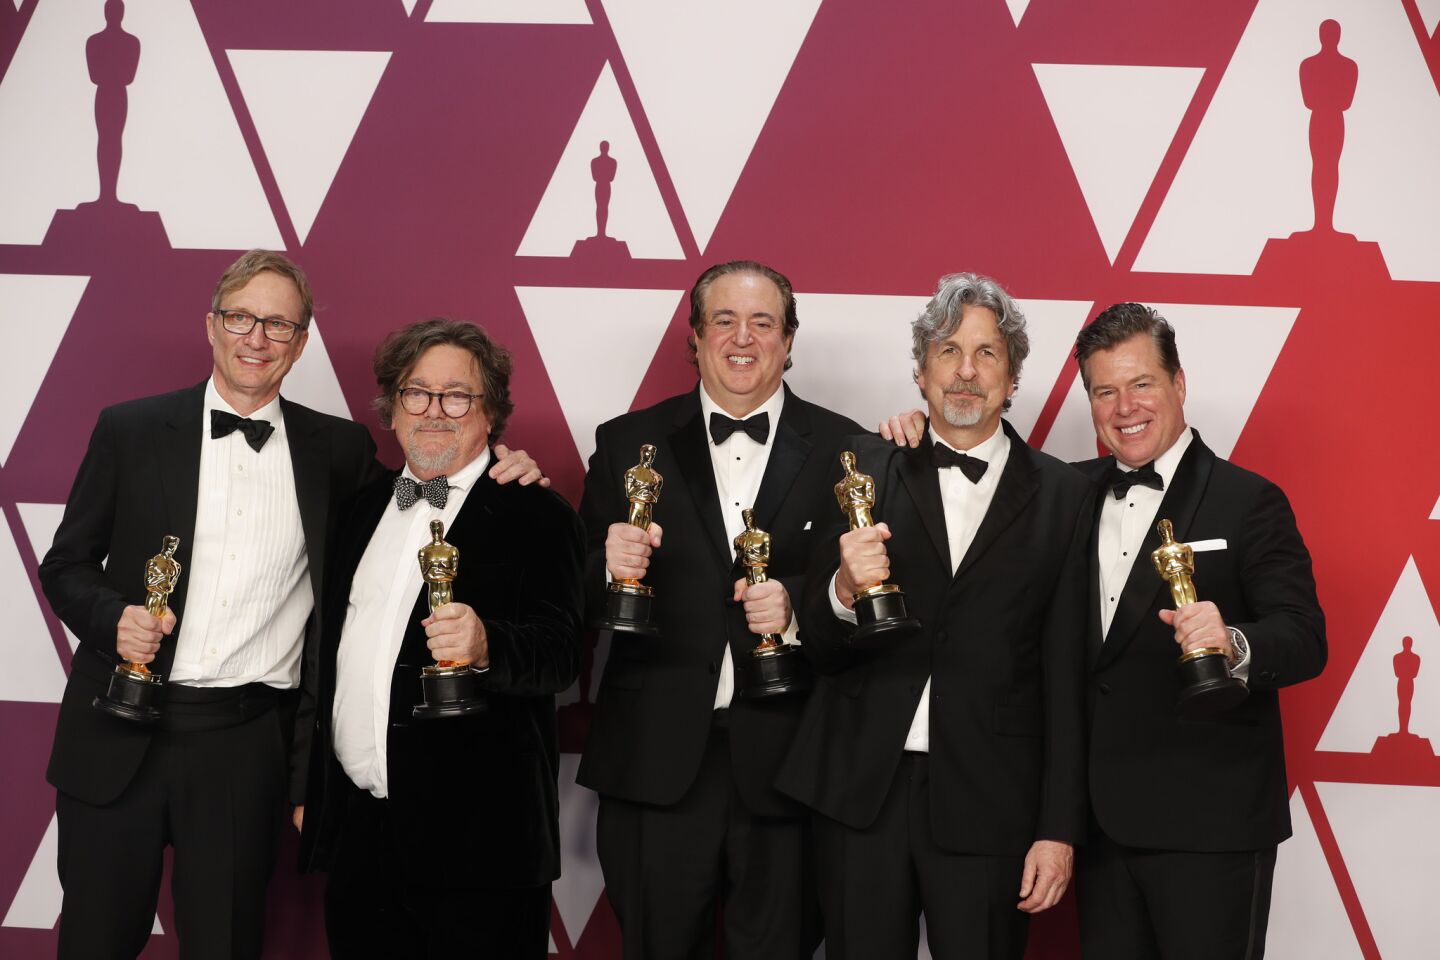 Jim Burke, Charles B. Wessler, Nick Vallelonga, Peter Farrelly and Brian Currie, winners of the best picture award for "Green Book."